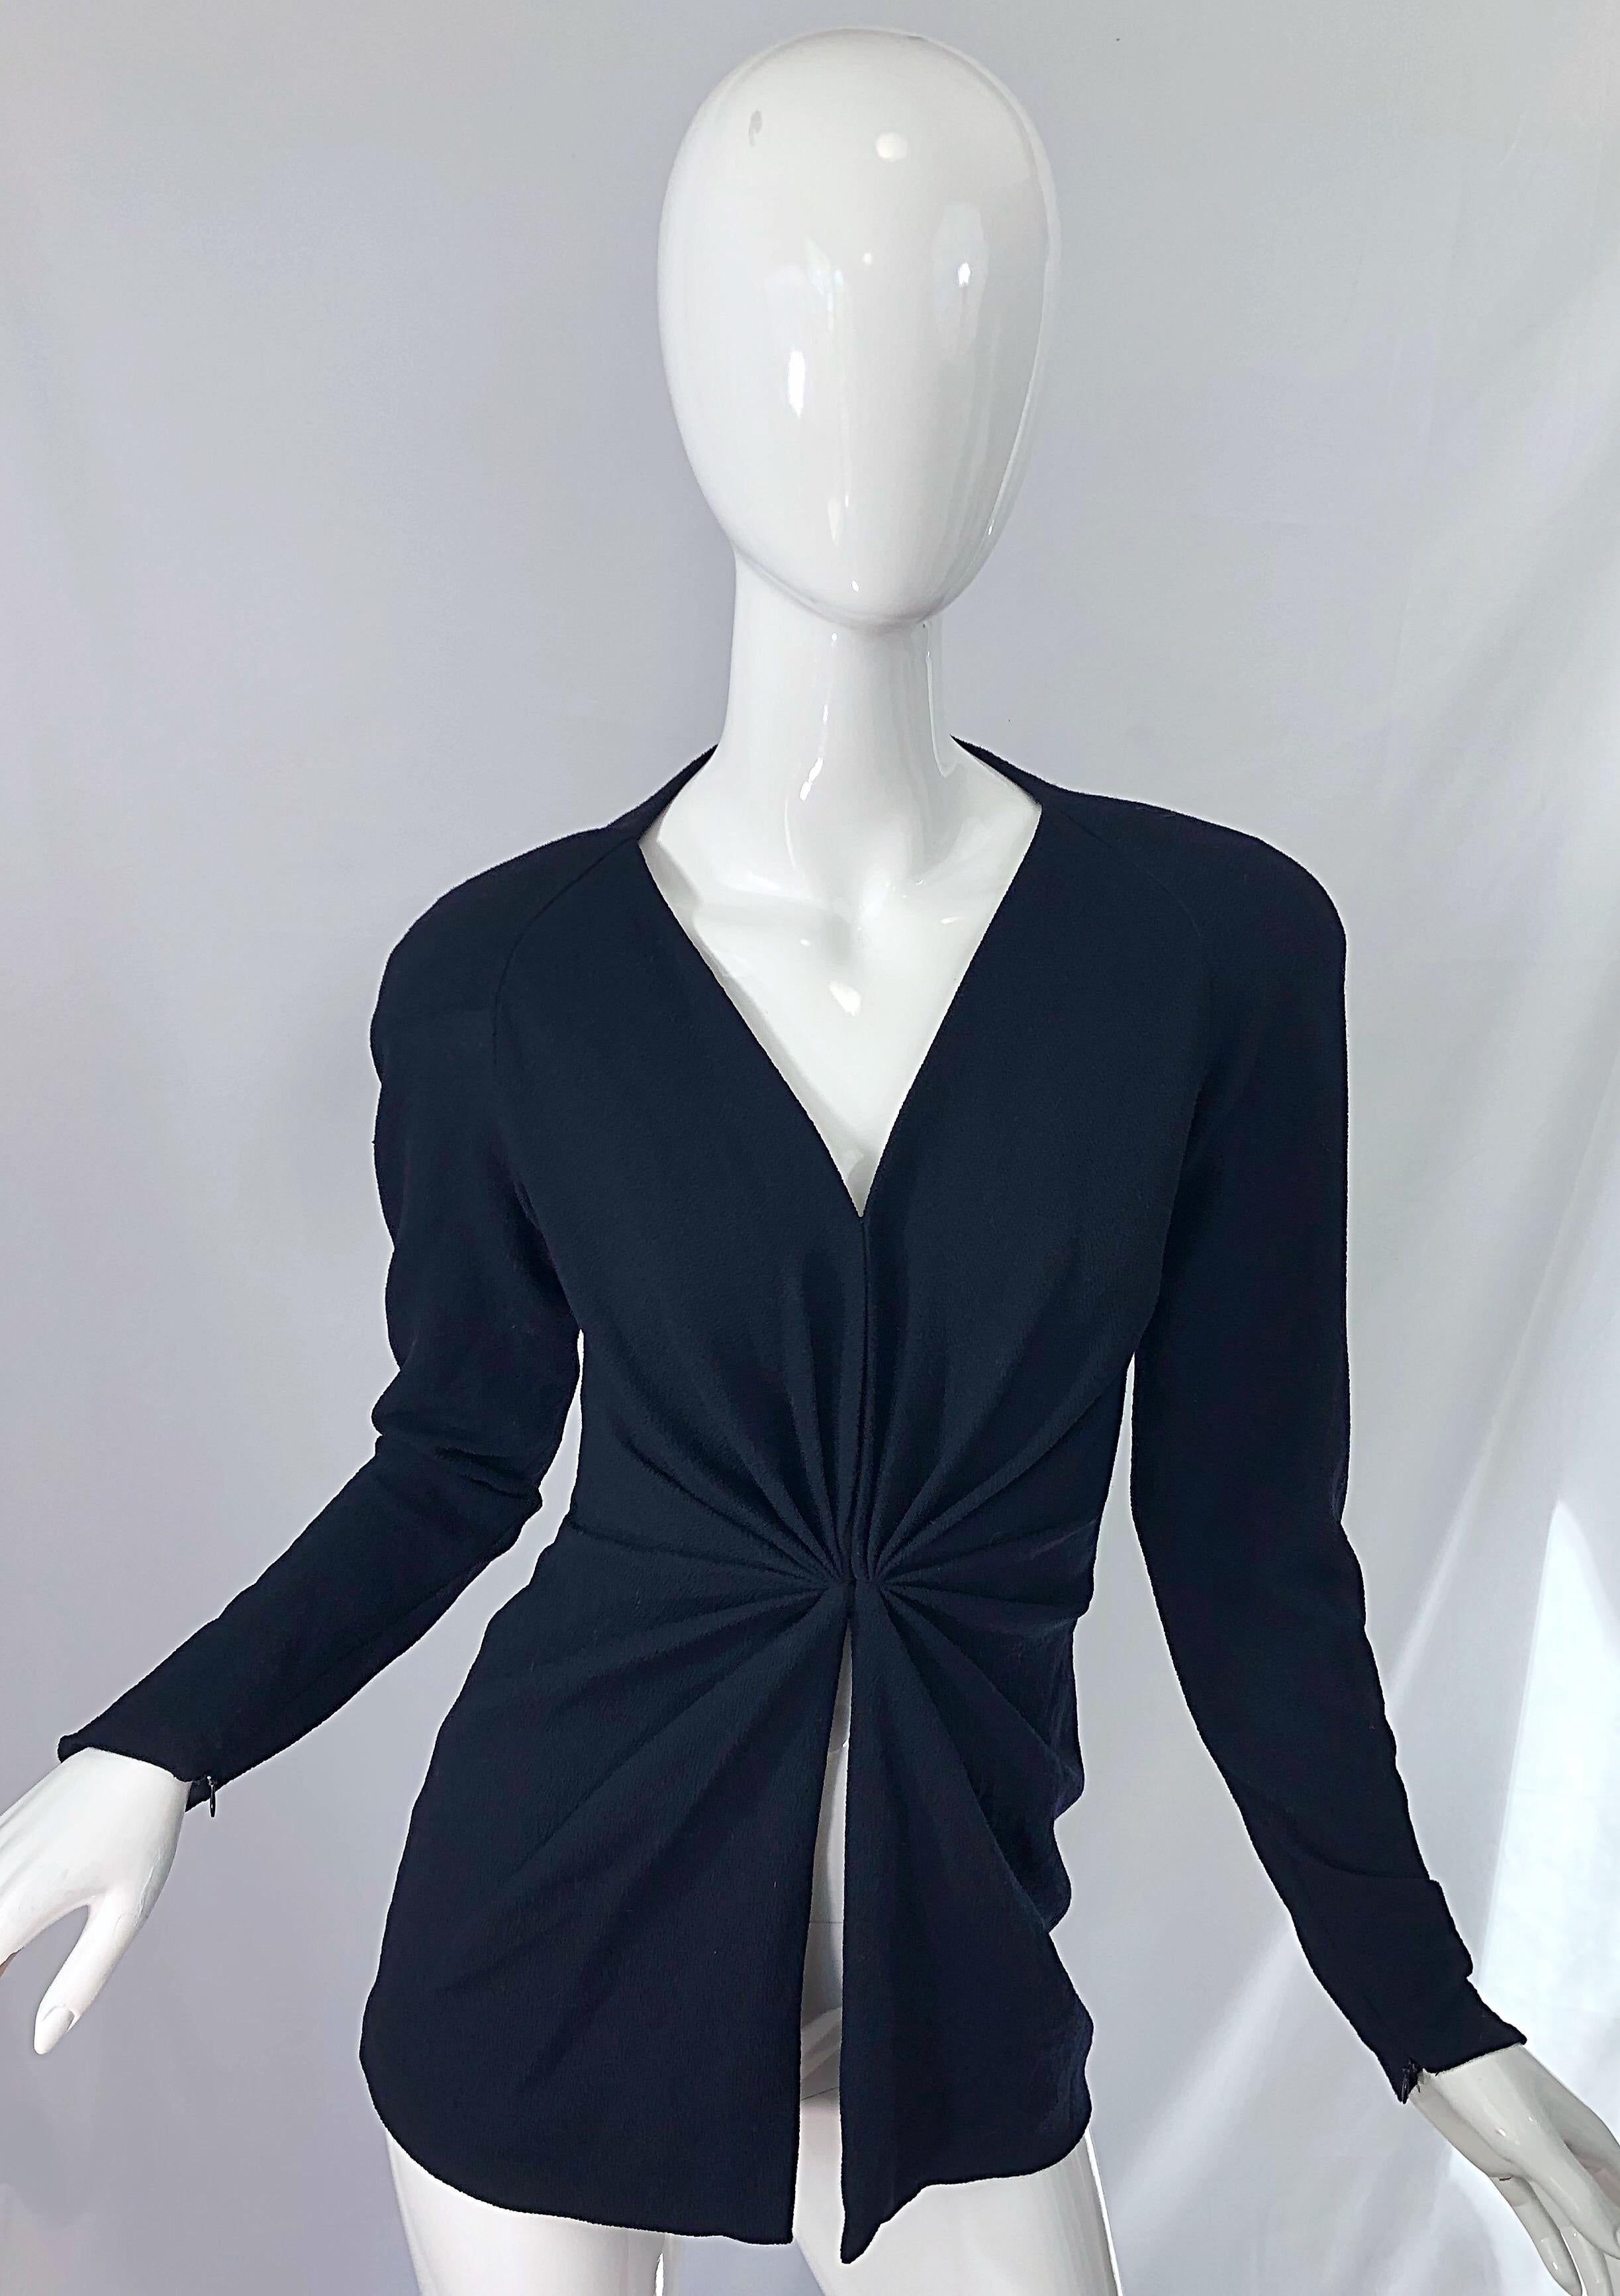 Classic, with a sexy edge early 1990s DONNA KARAN Collection black crepe top ! Features flattering ruching at waist. Hook-and-eye closures down the front. Interior elastic waistband allows for comfort and ease. Hidden zippers at each sleeve cuff.